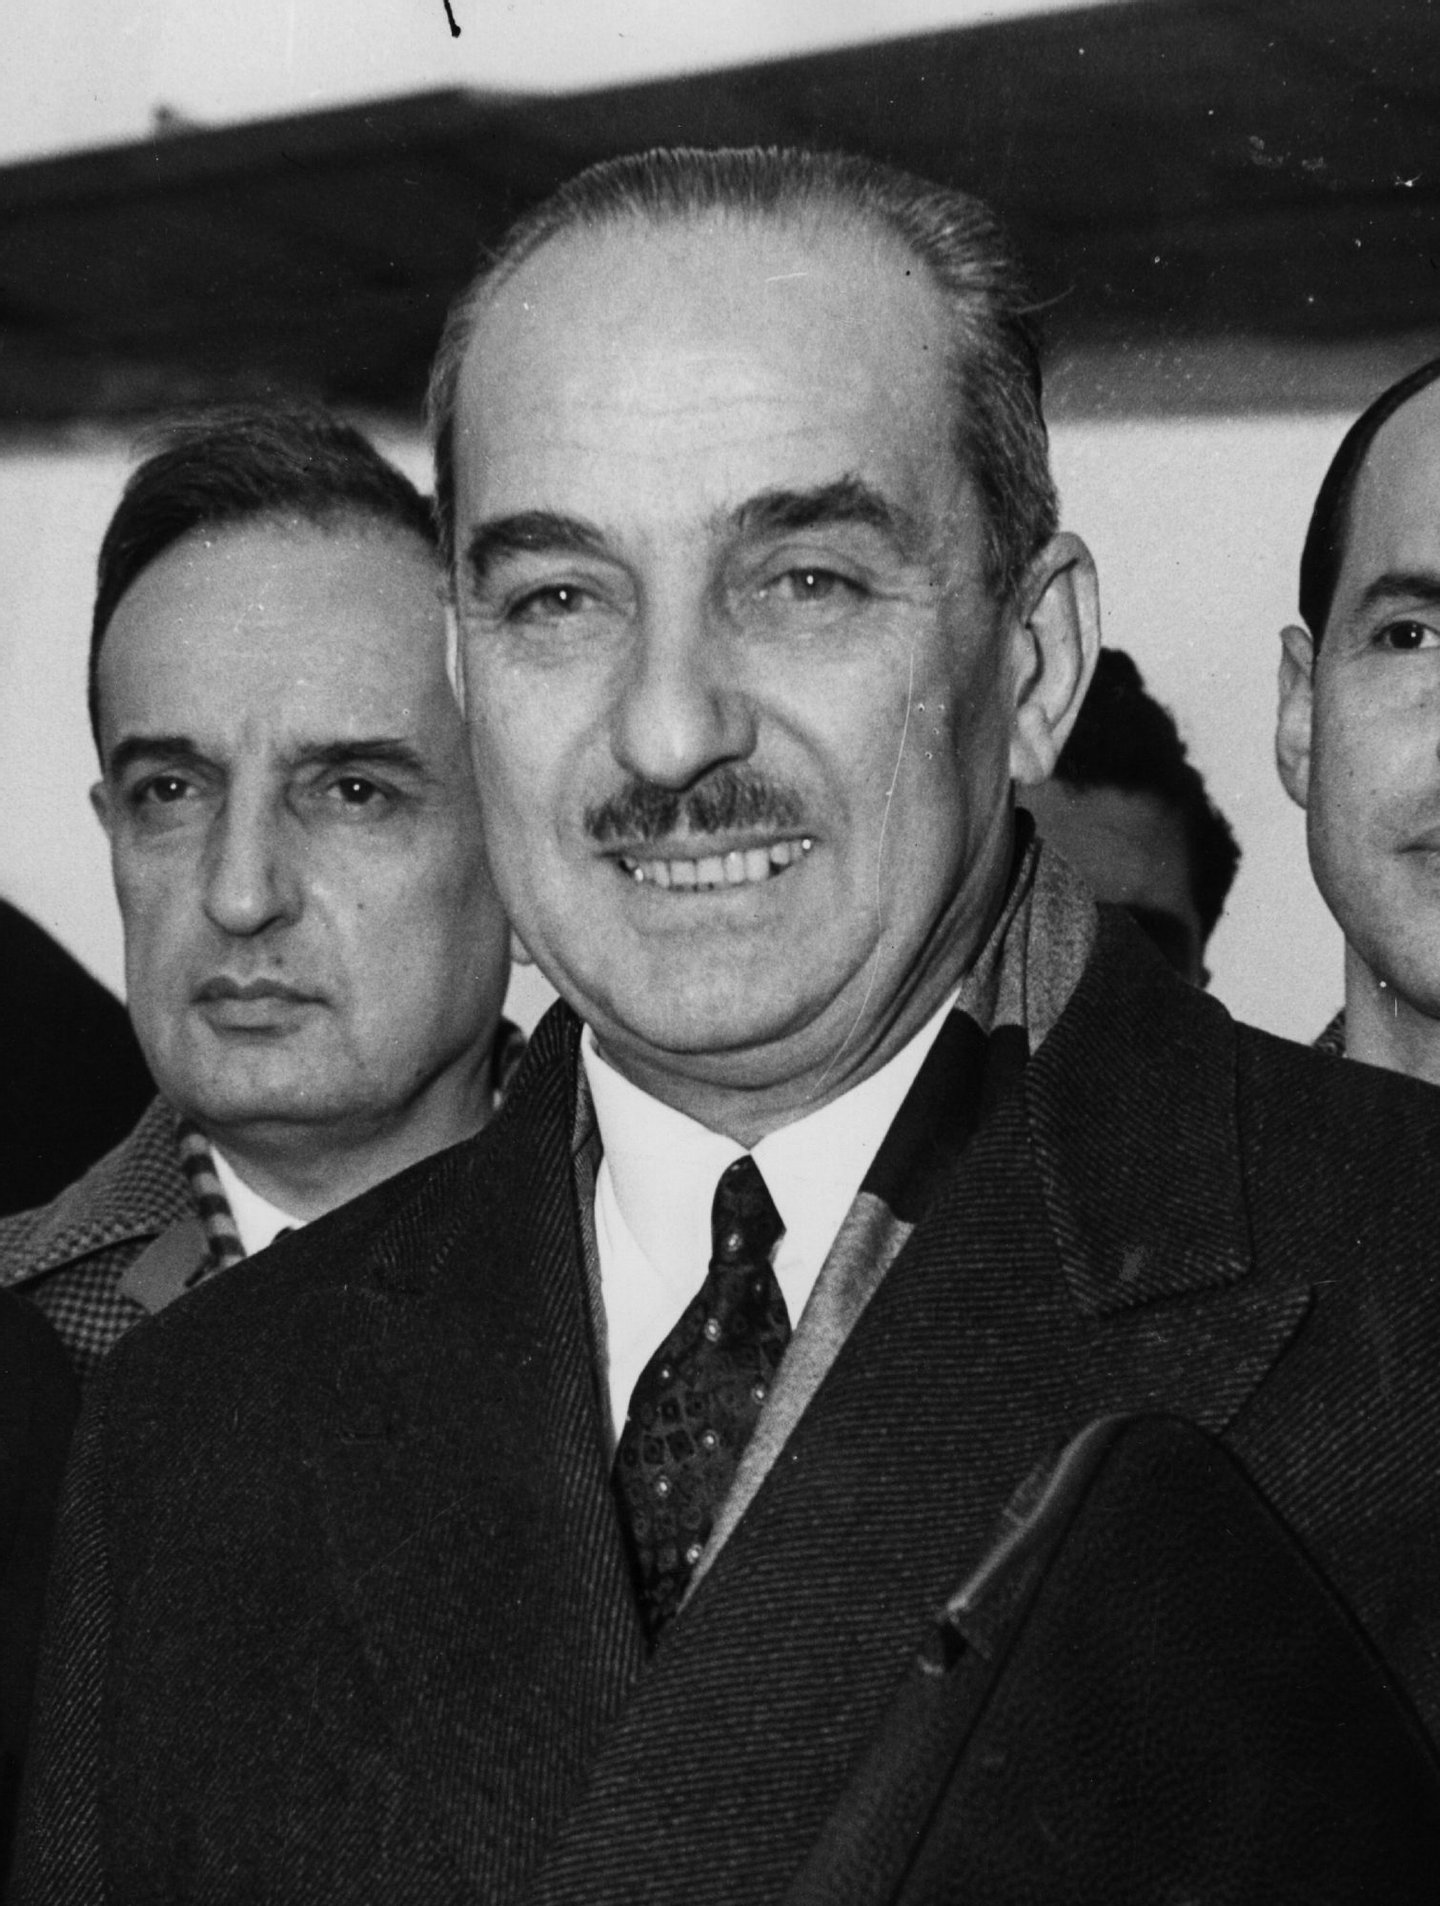 1956: Adnan Menderes (1889 - 1961), Turkish Prime Minister, arriving in Britain. (Photo by Hulton Archive/Getty Images)